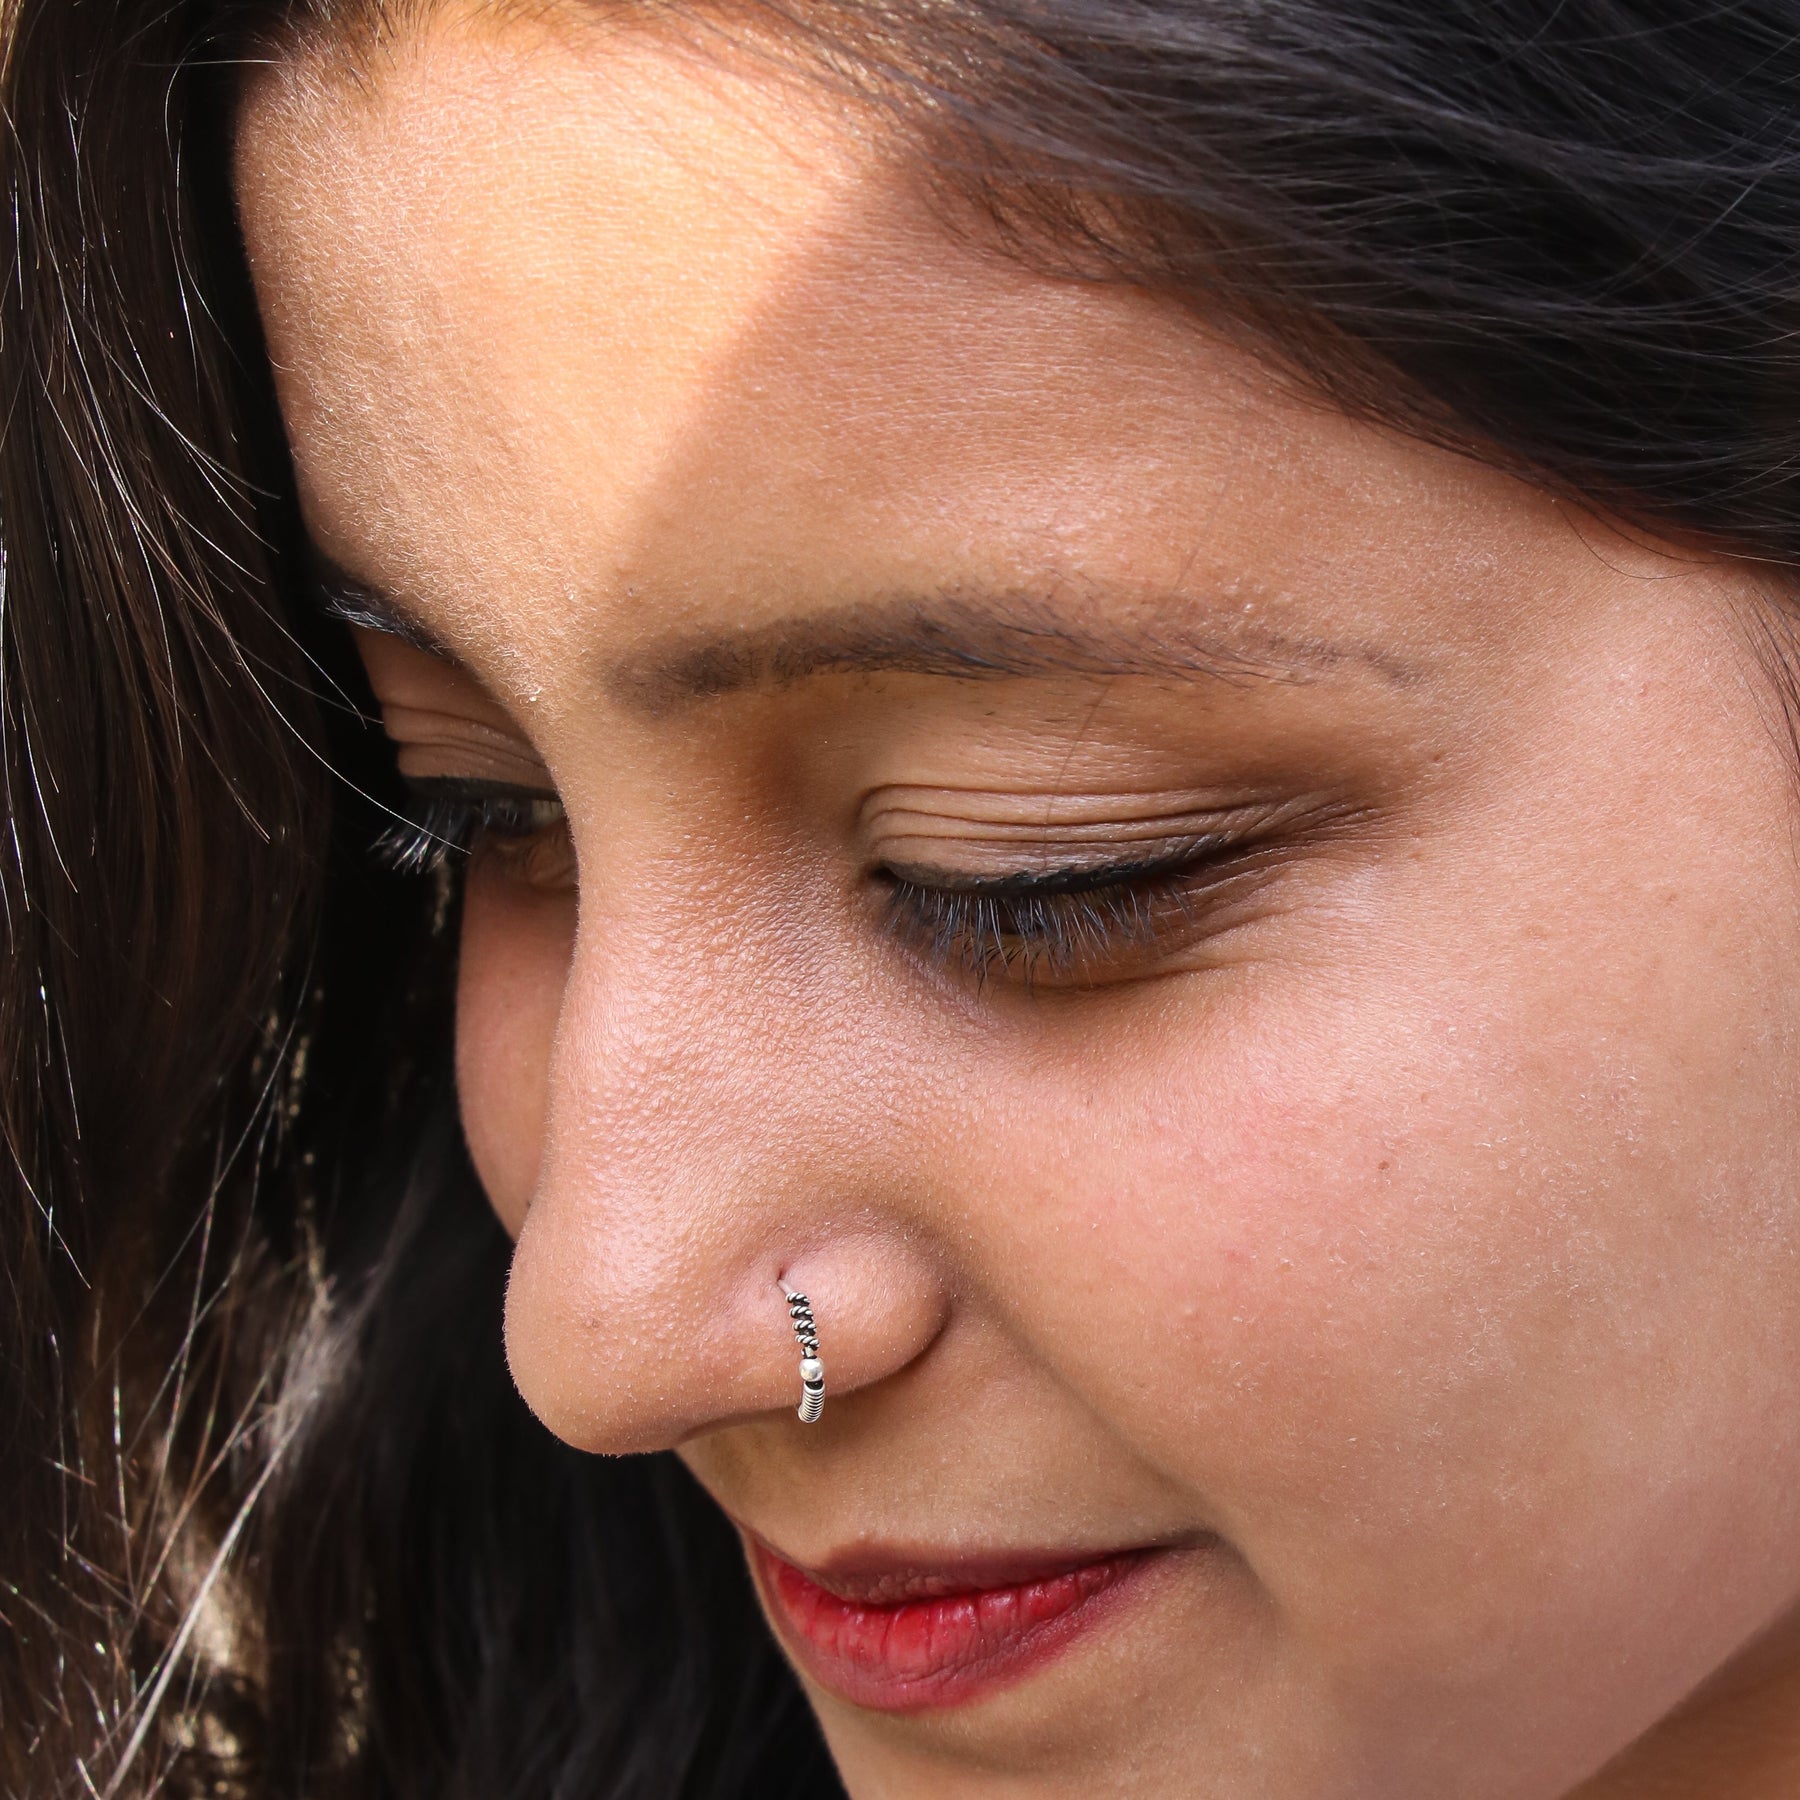 Helix and Silver Bead Nose Ring